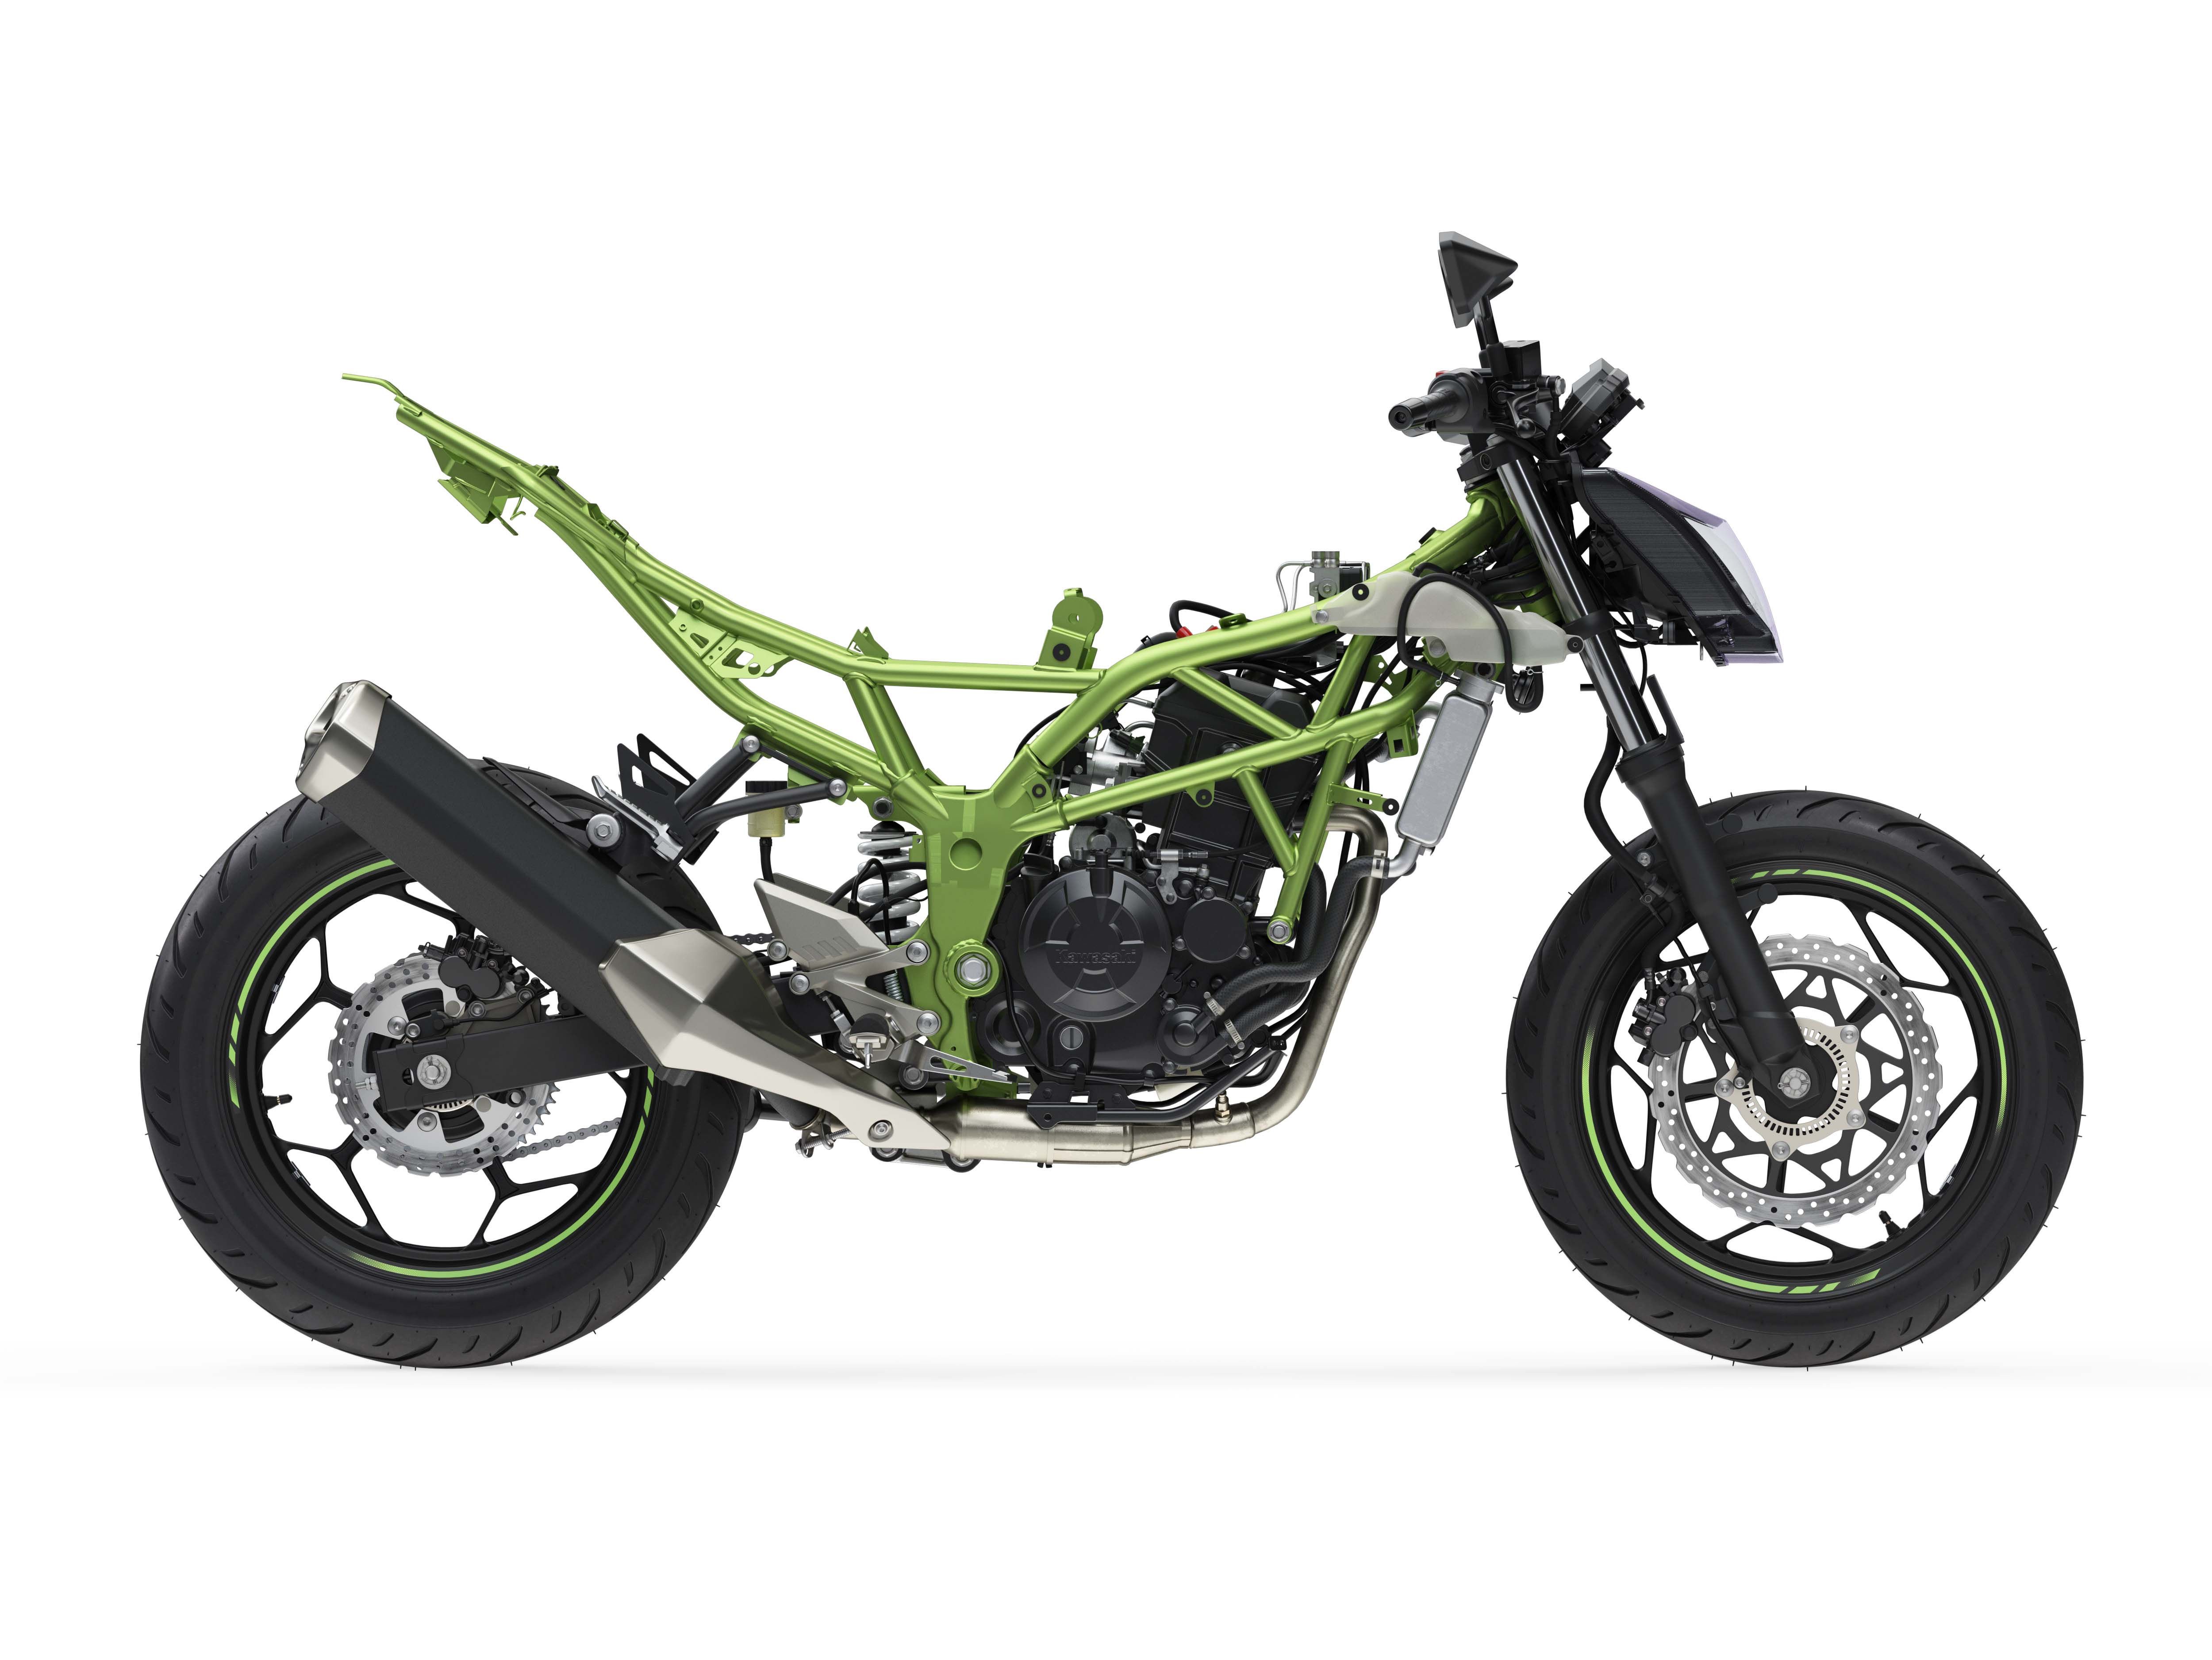 The Kawasaki Z125 Debuts for New Riders in Europe - Asphalt & Rubber